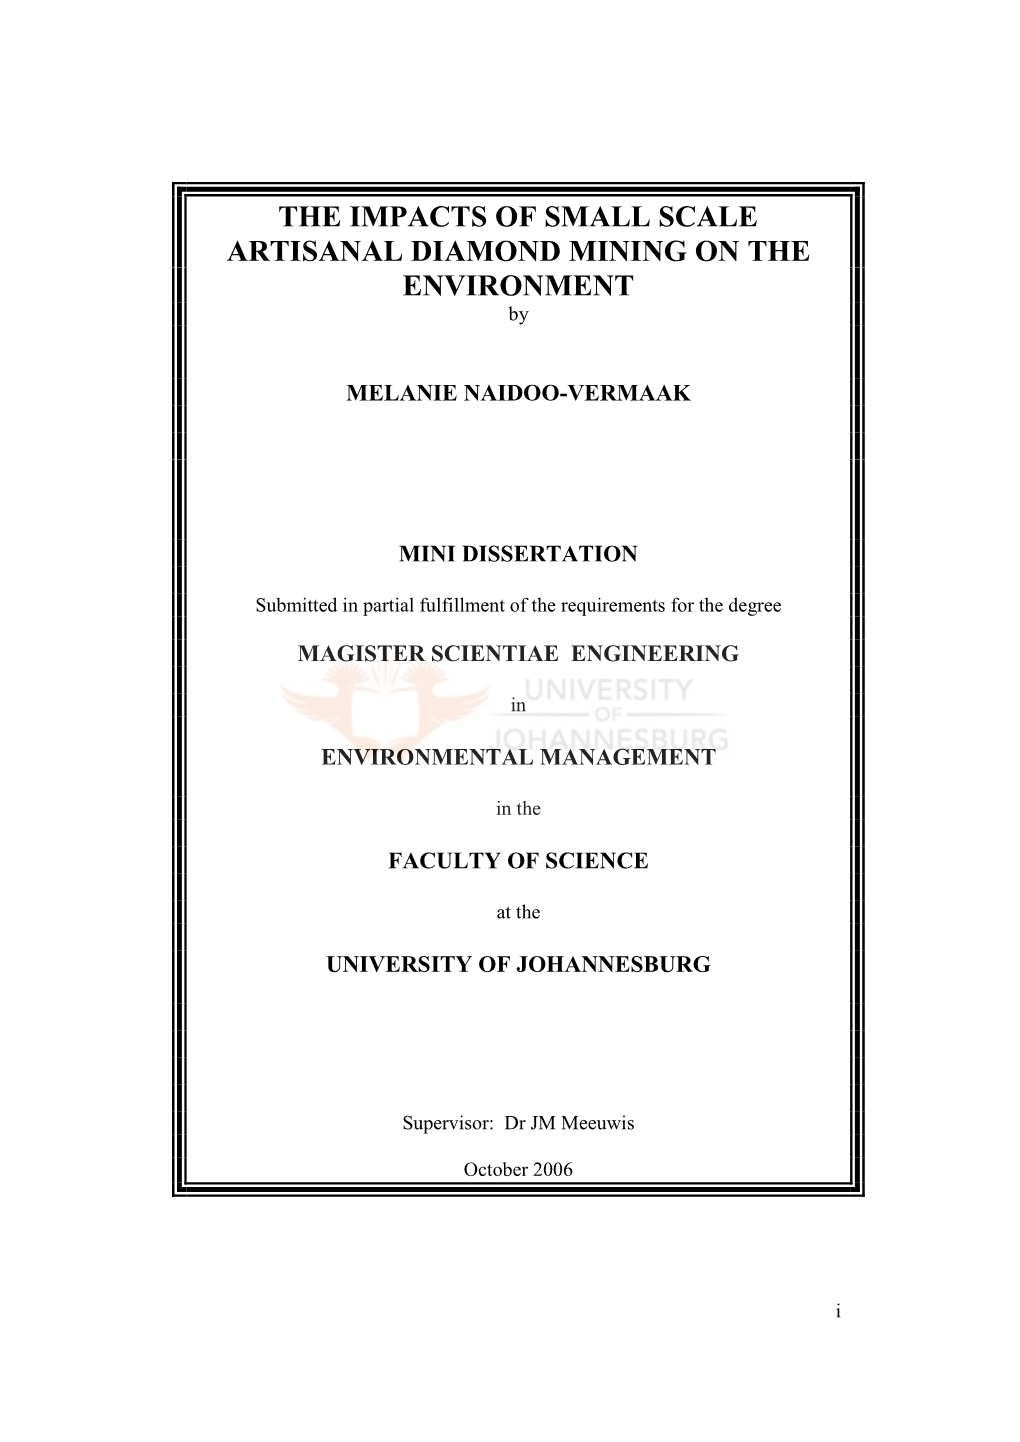 THE IMPACTS of SMALL SCALE ARTISANAL DIAMOND MINING on the ENVIRONMENT By